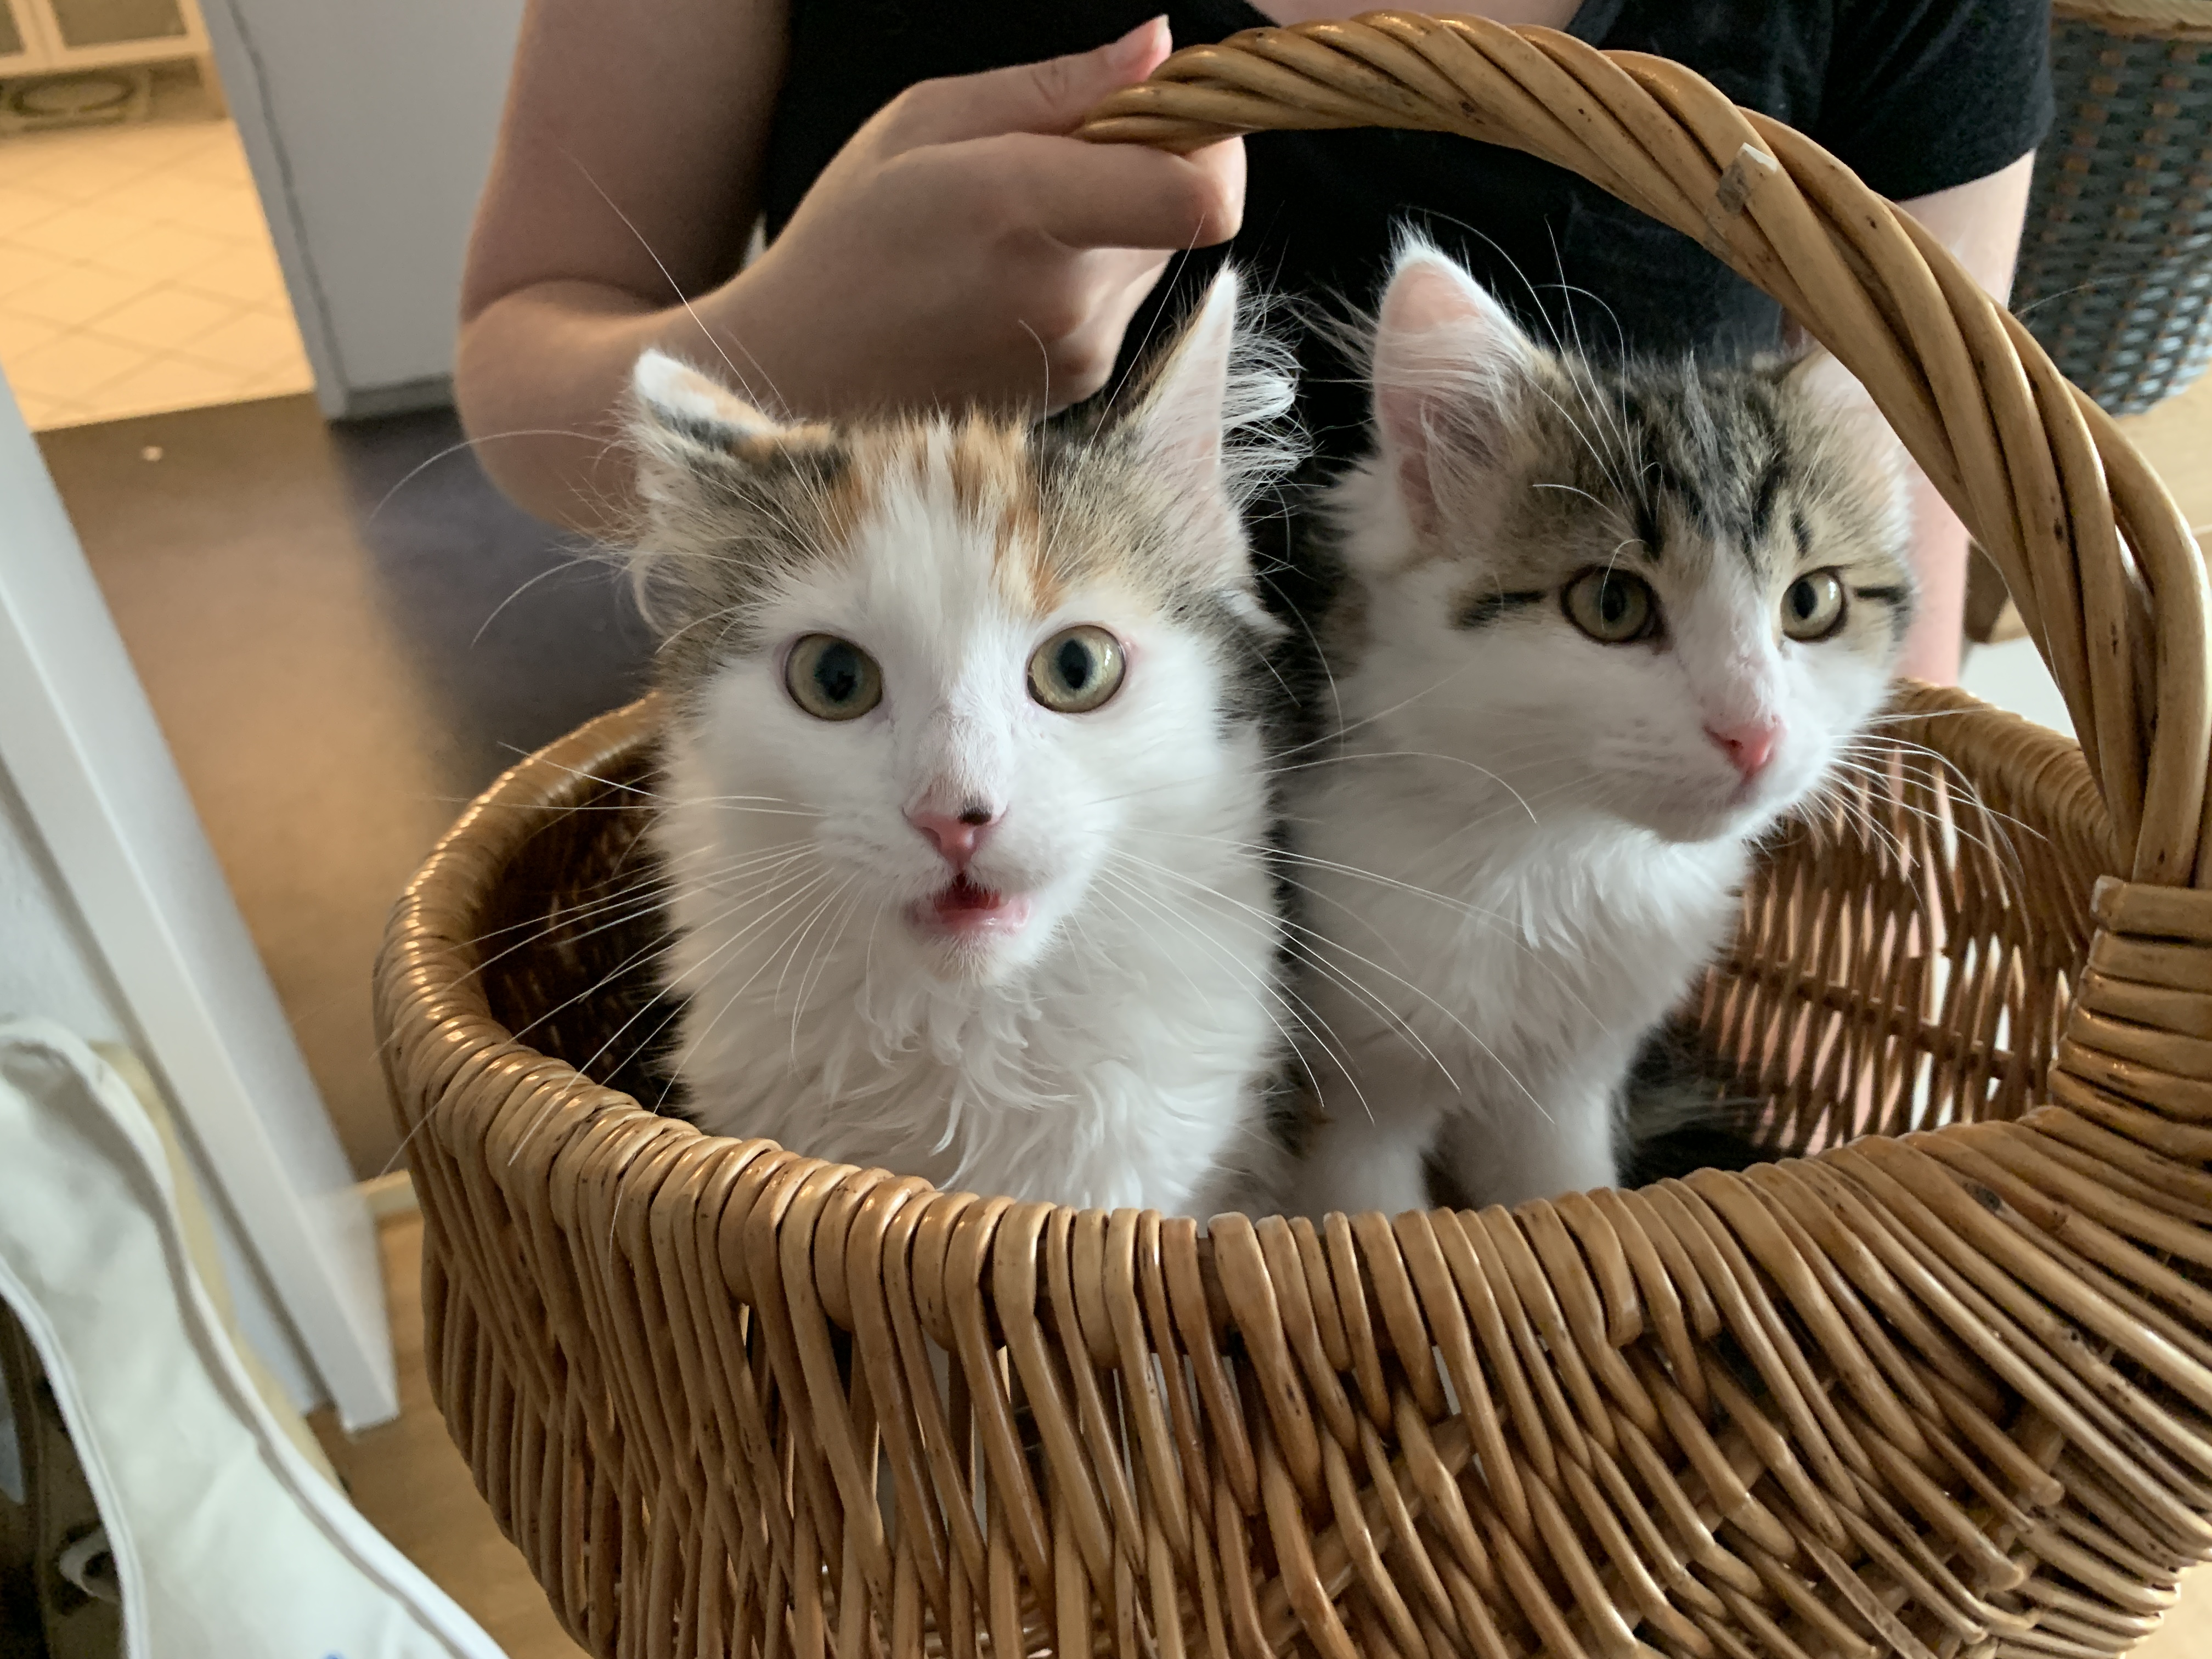 Millie & Coco in a basket